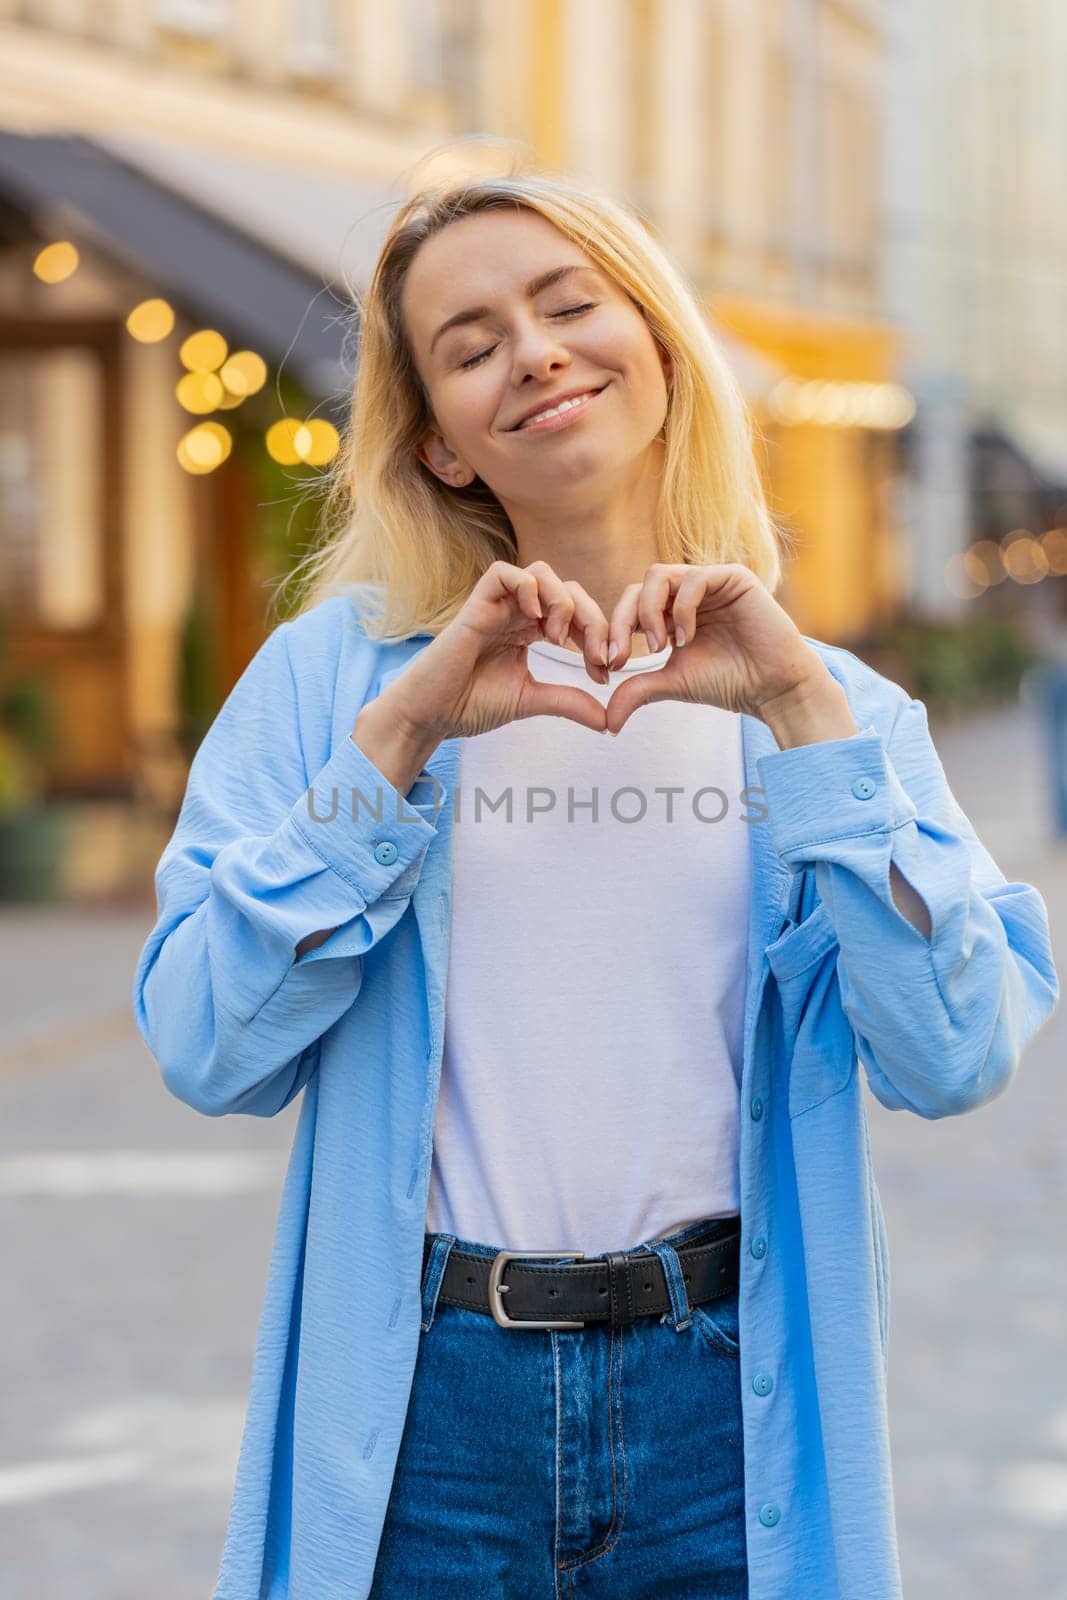 I love you. Caucasian woman makes symbol of love, showing heart sign to camera, express romantic feelings express sincere positive feelings. Charity, gratitude, donation. Outdoors in urban city street